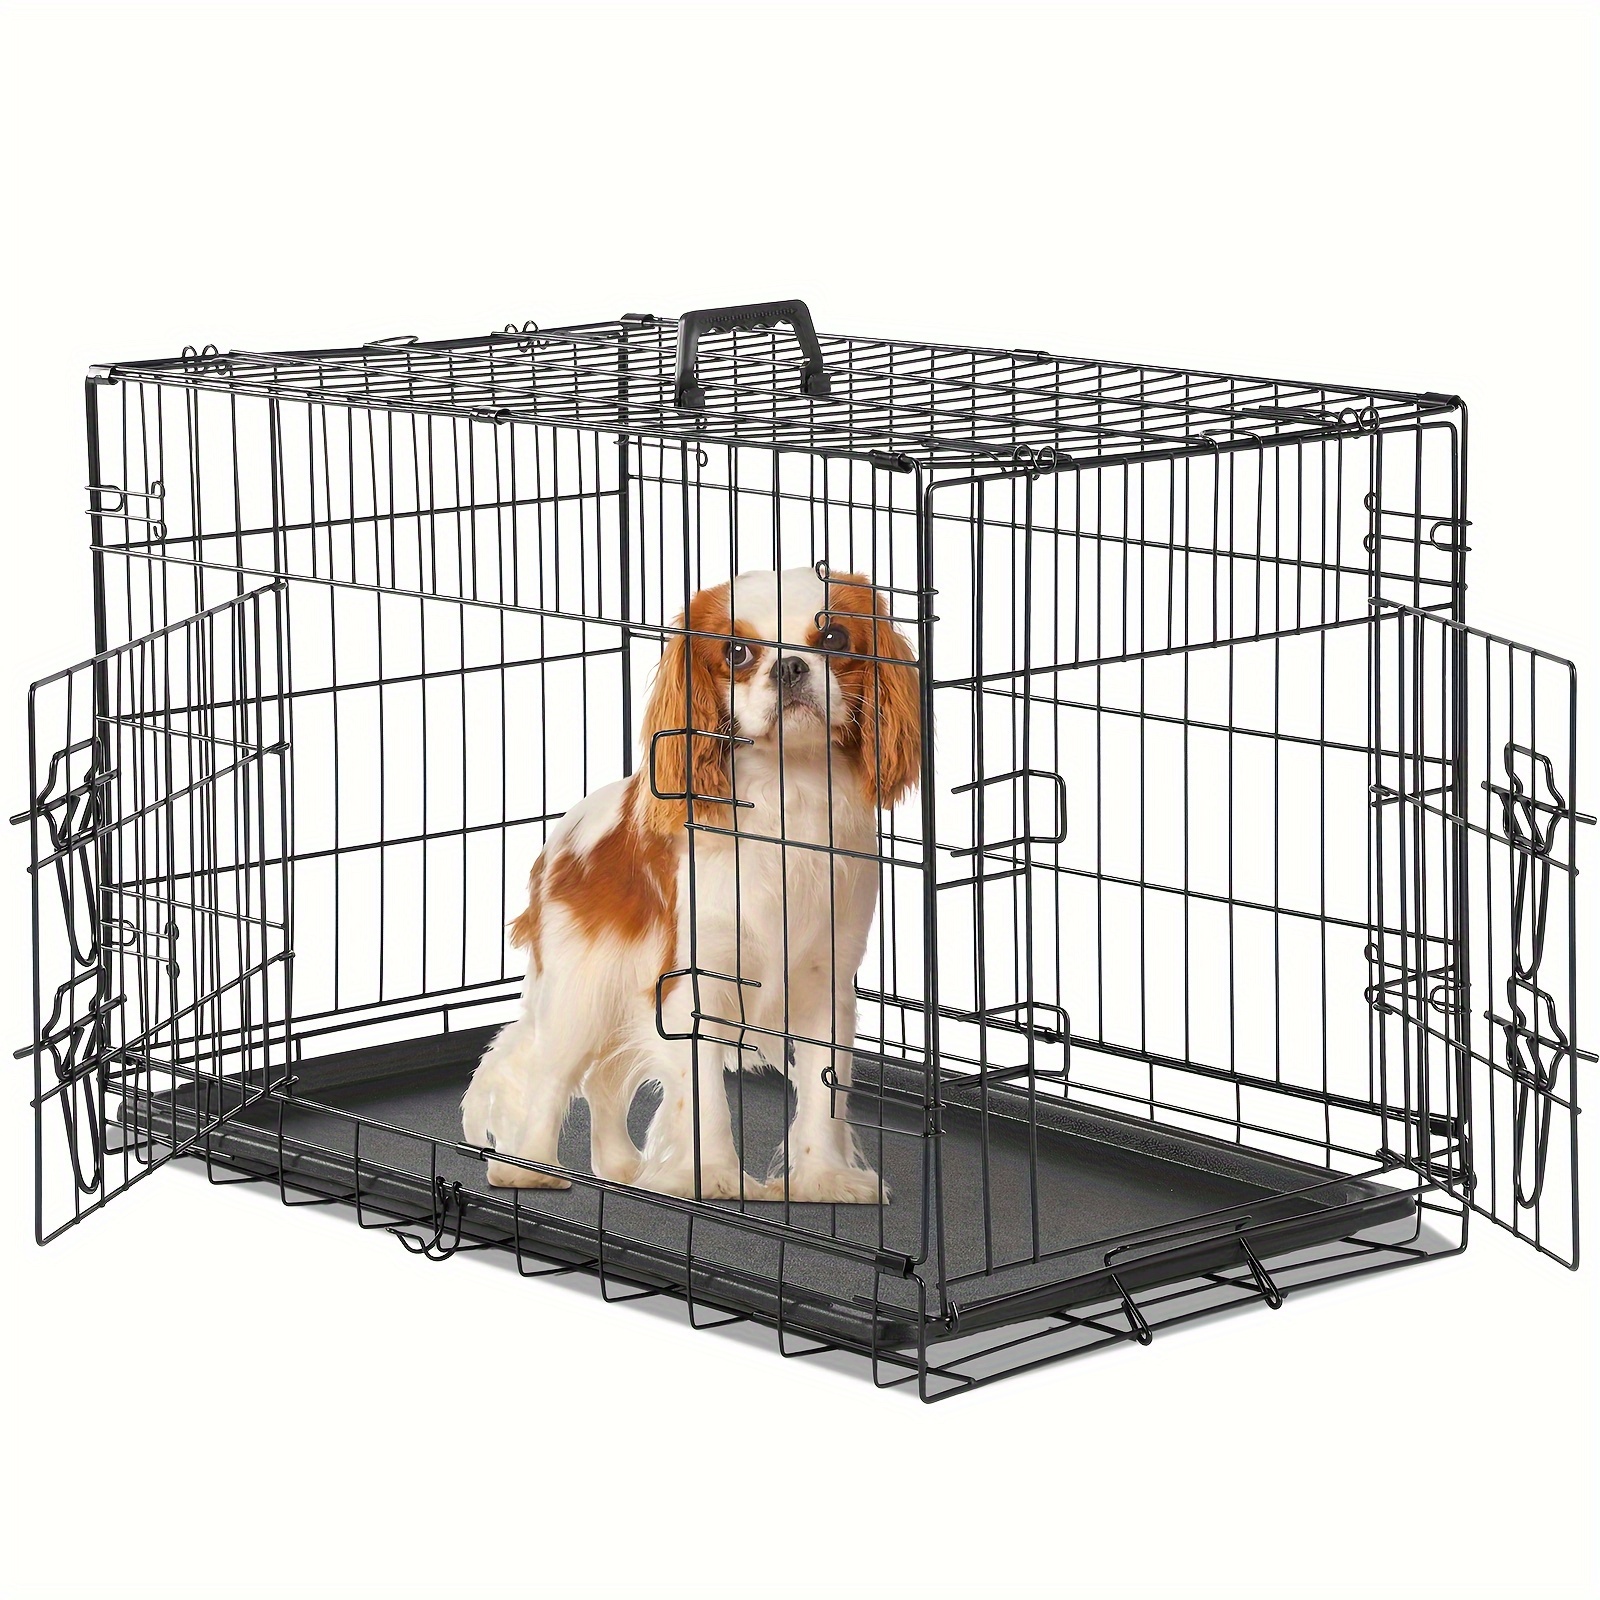 

Dog Cage, Double Door Dog Cage With Divider Panel, Multiple Size Dog Cage For Puppies, Dogs Folding Metal Wire Dog Cage With Plastic Leak-proof Pan Tray For Indoor, Outdoor, Travel